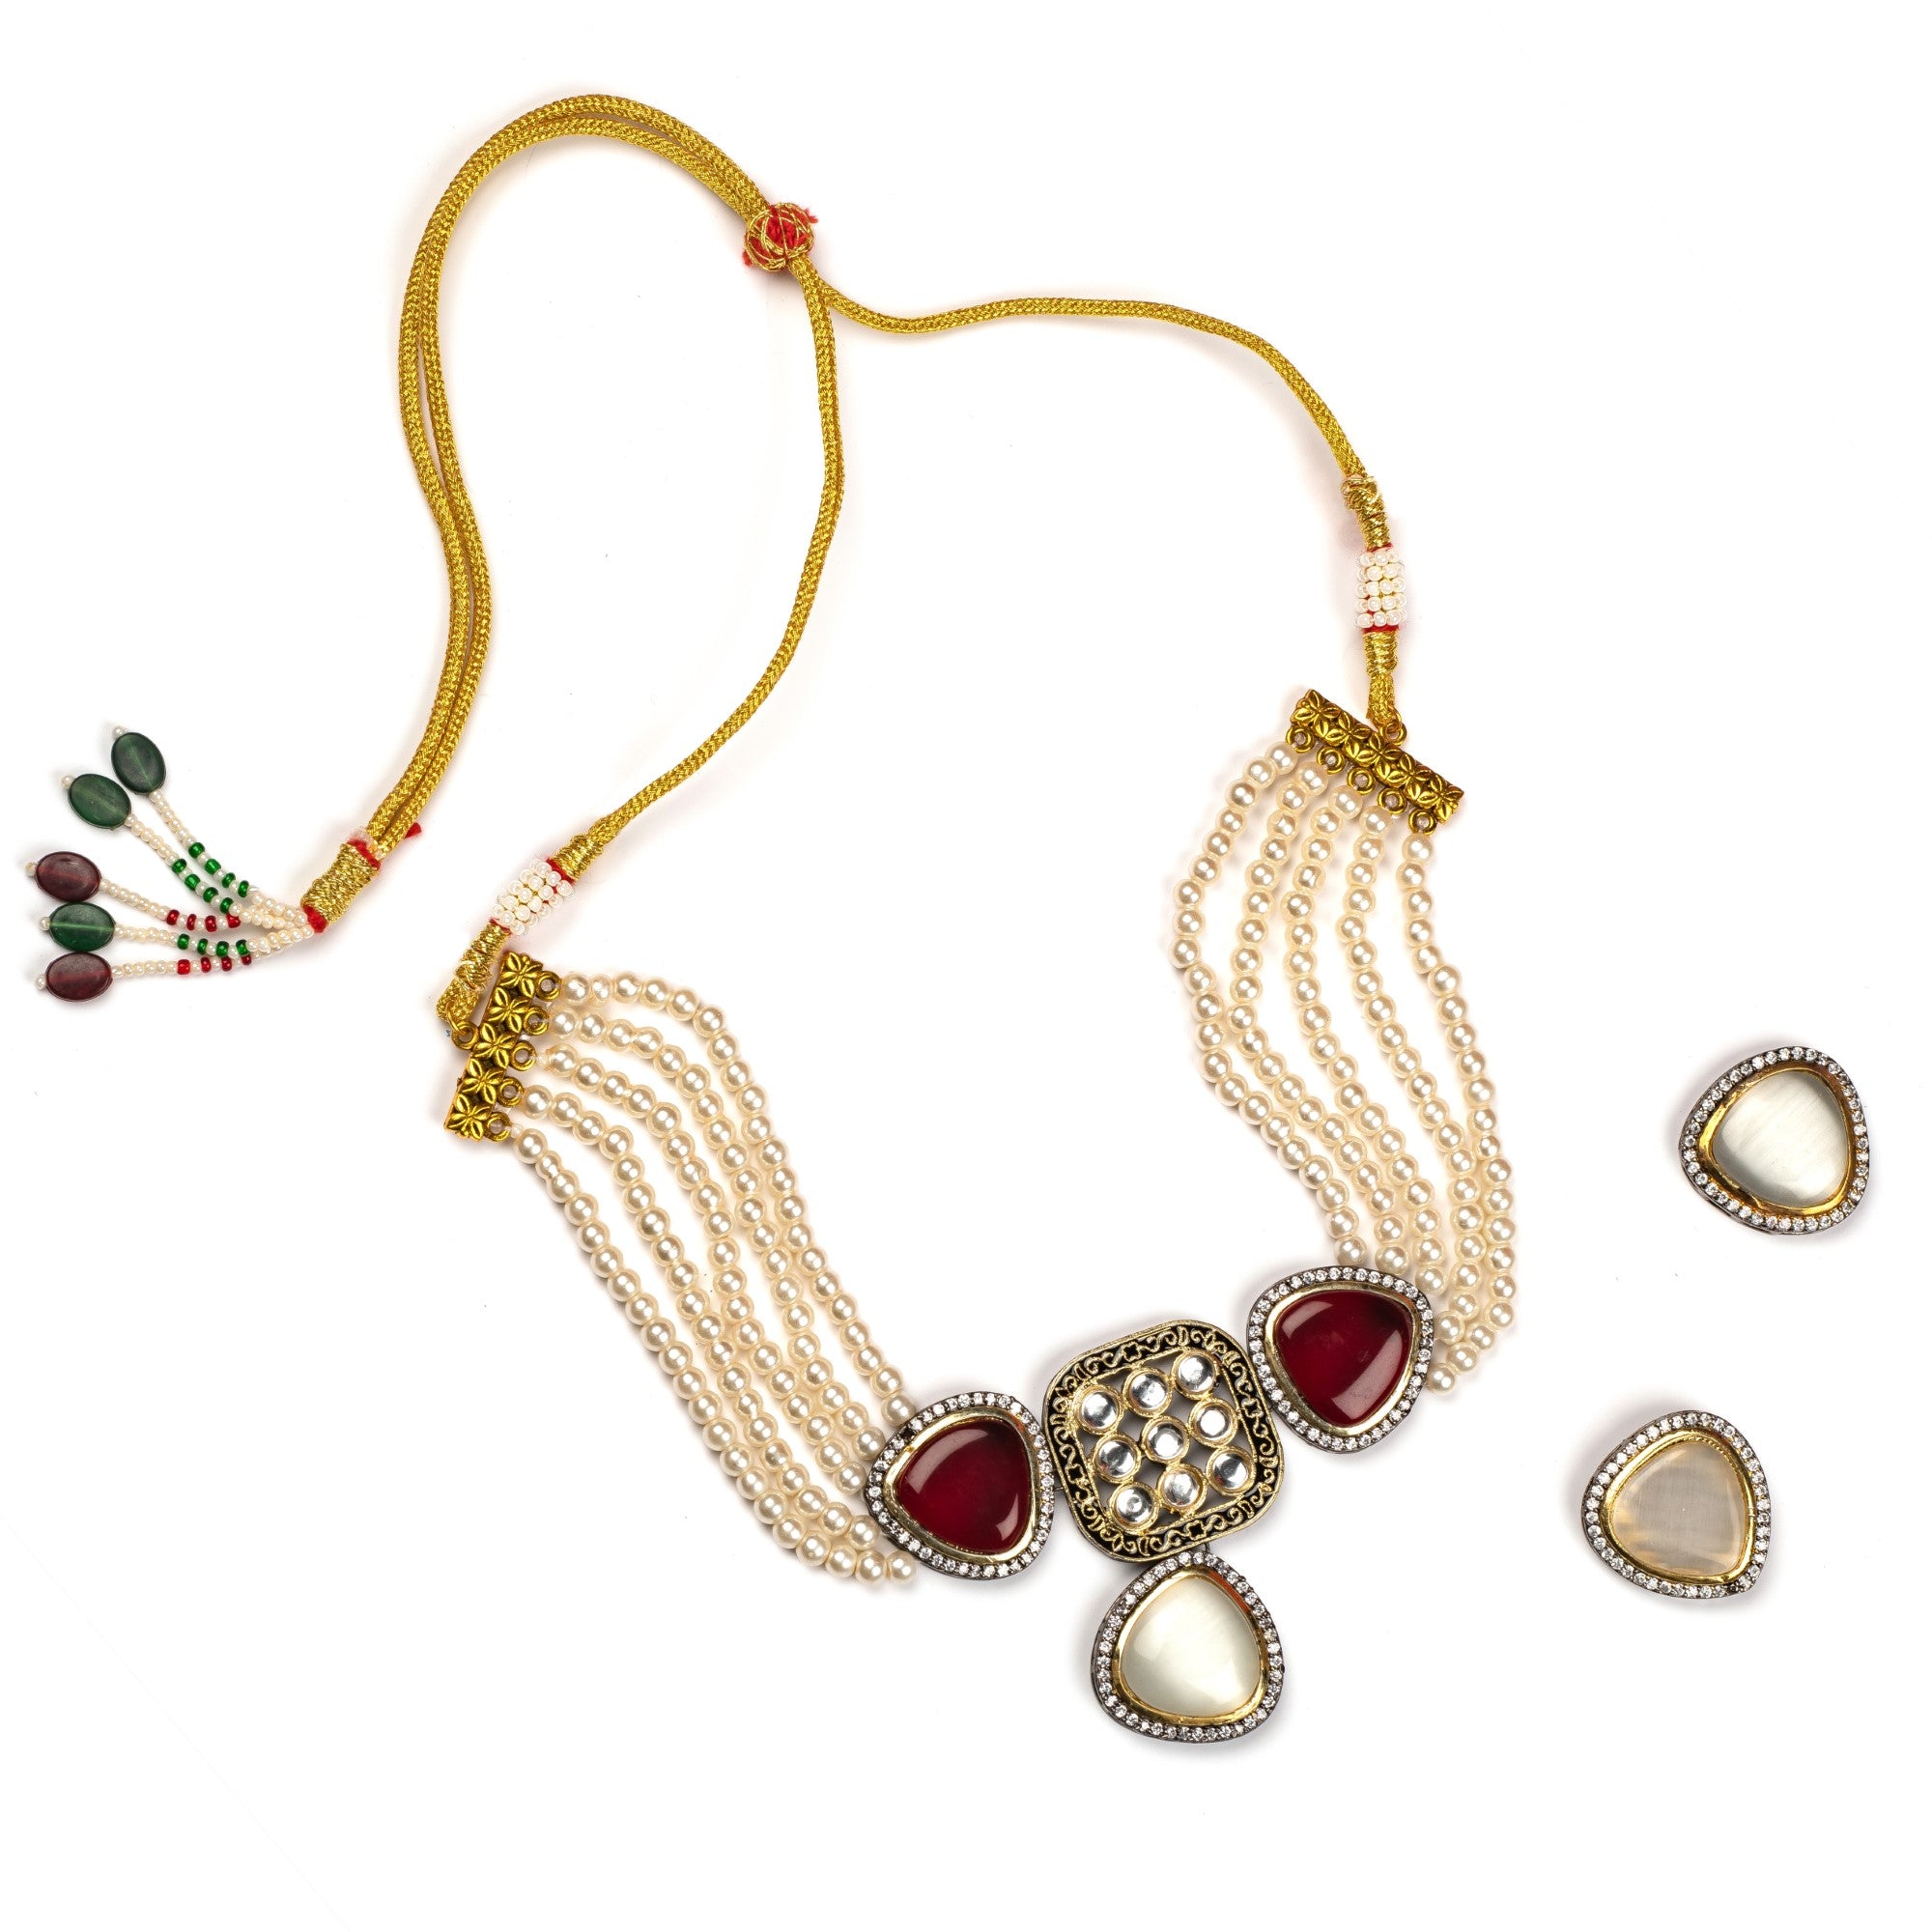 Women's White Brass Jewellery Sets with Adjustable Thread - Abhika Creations